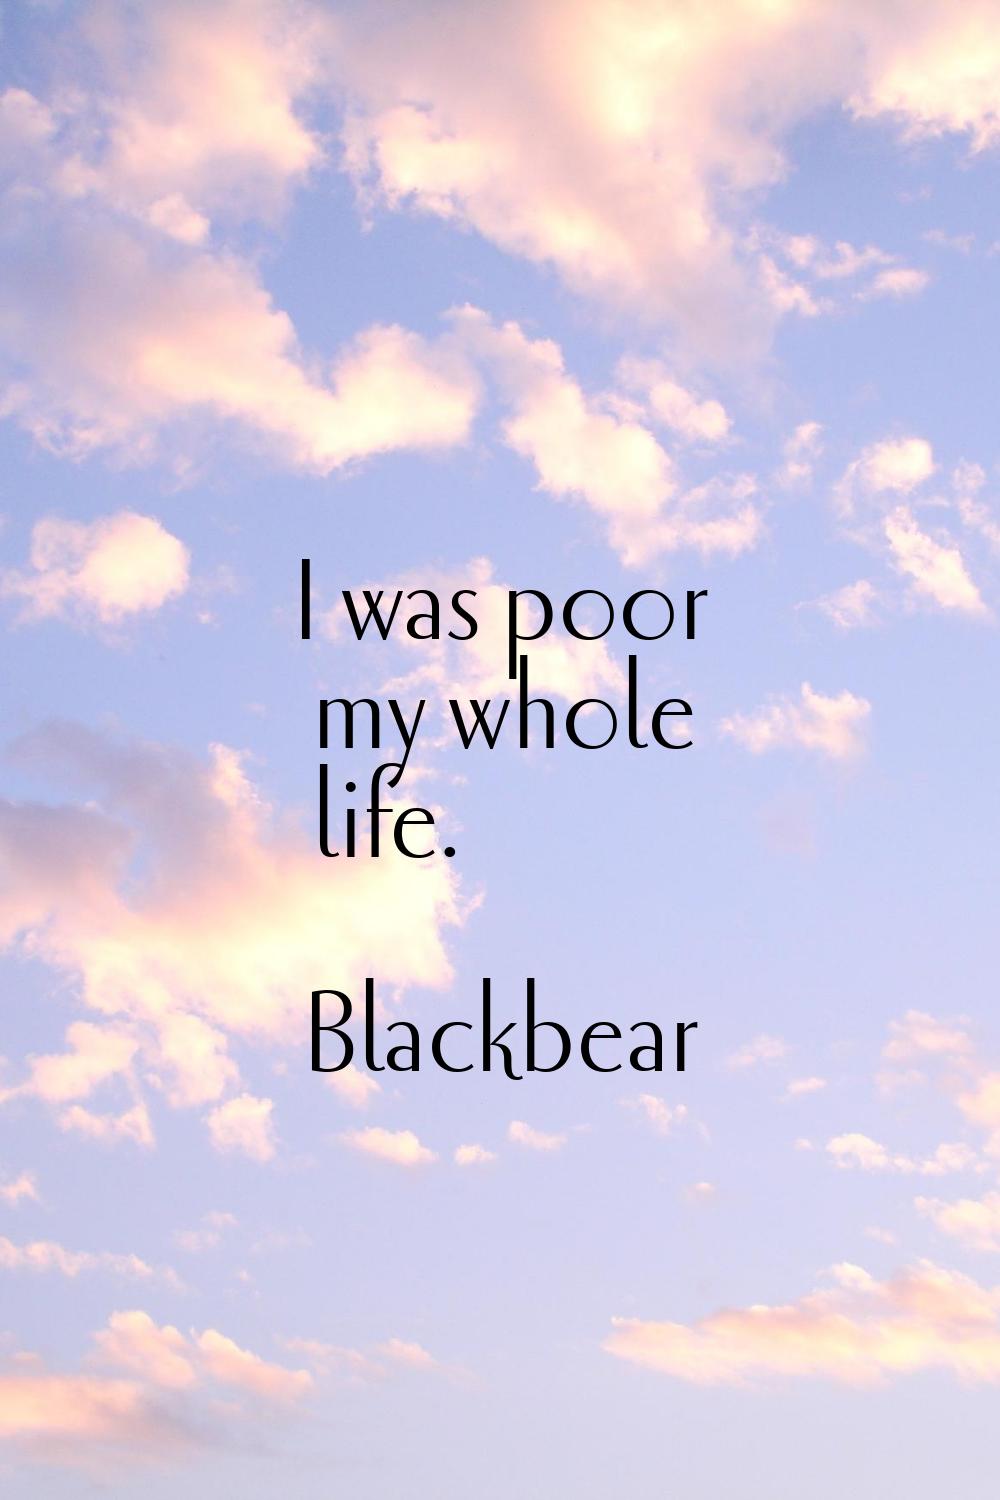 I was poor my whole life.